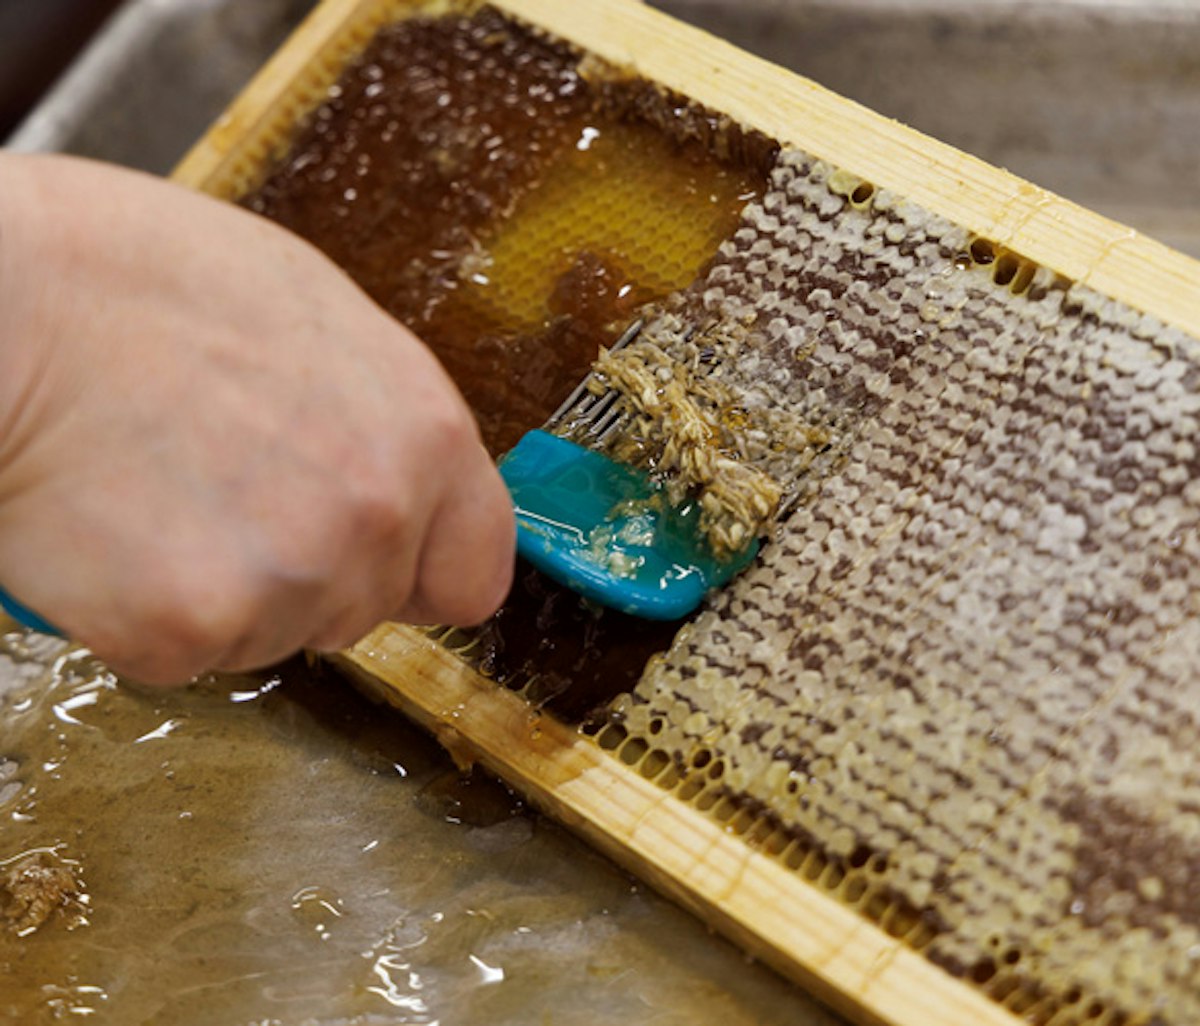 Uncapping a honeycomb frame with a tool to extract honey.